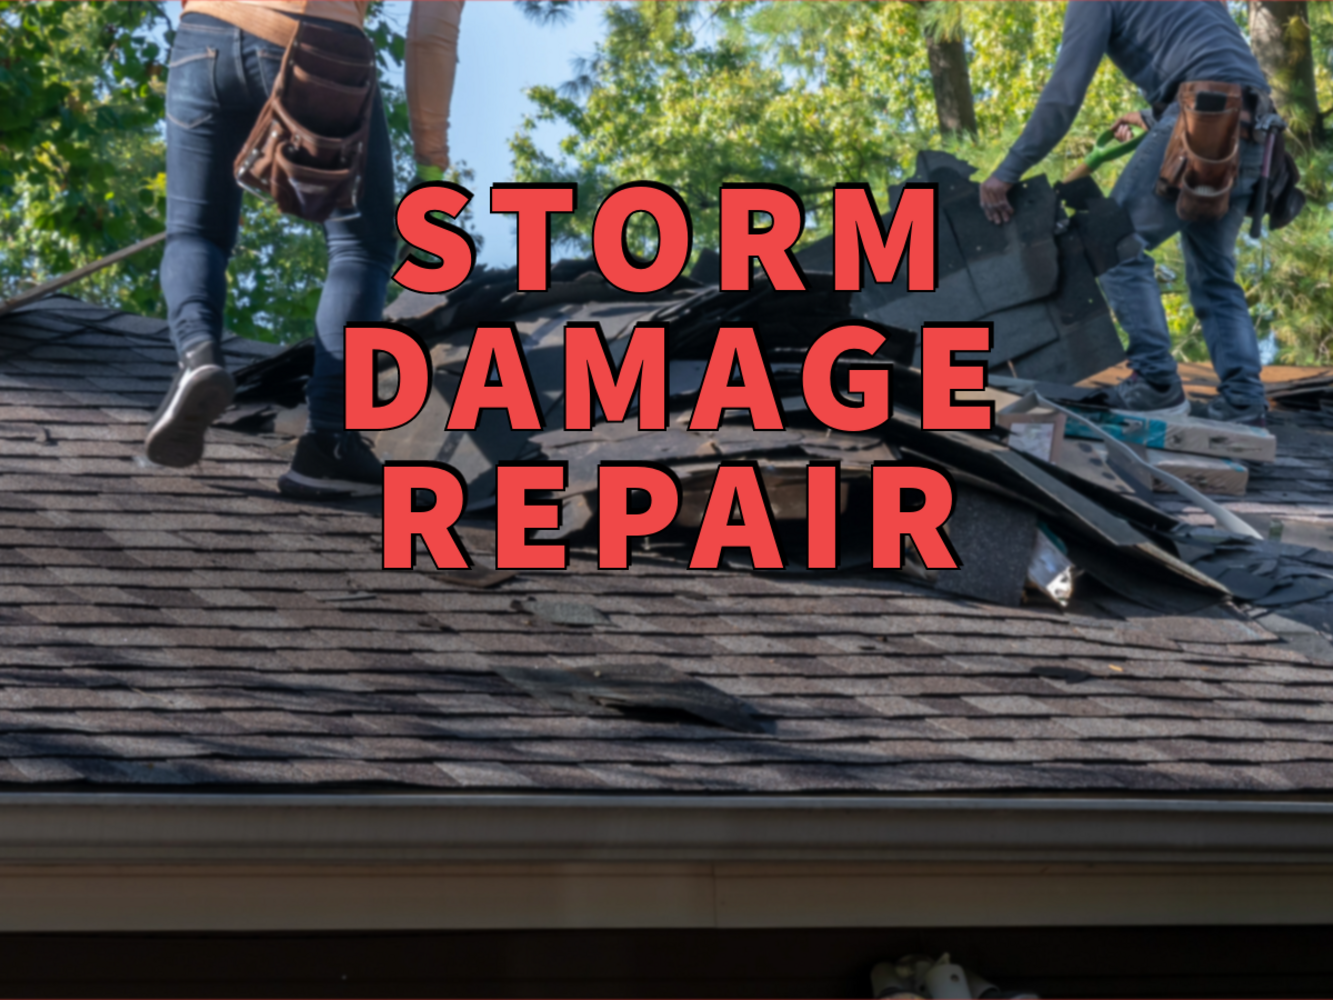 storm damage repair written in red over damaged roof with two workers inspecting bent shingles